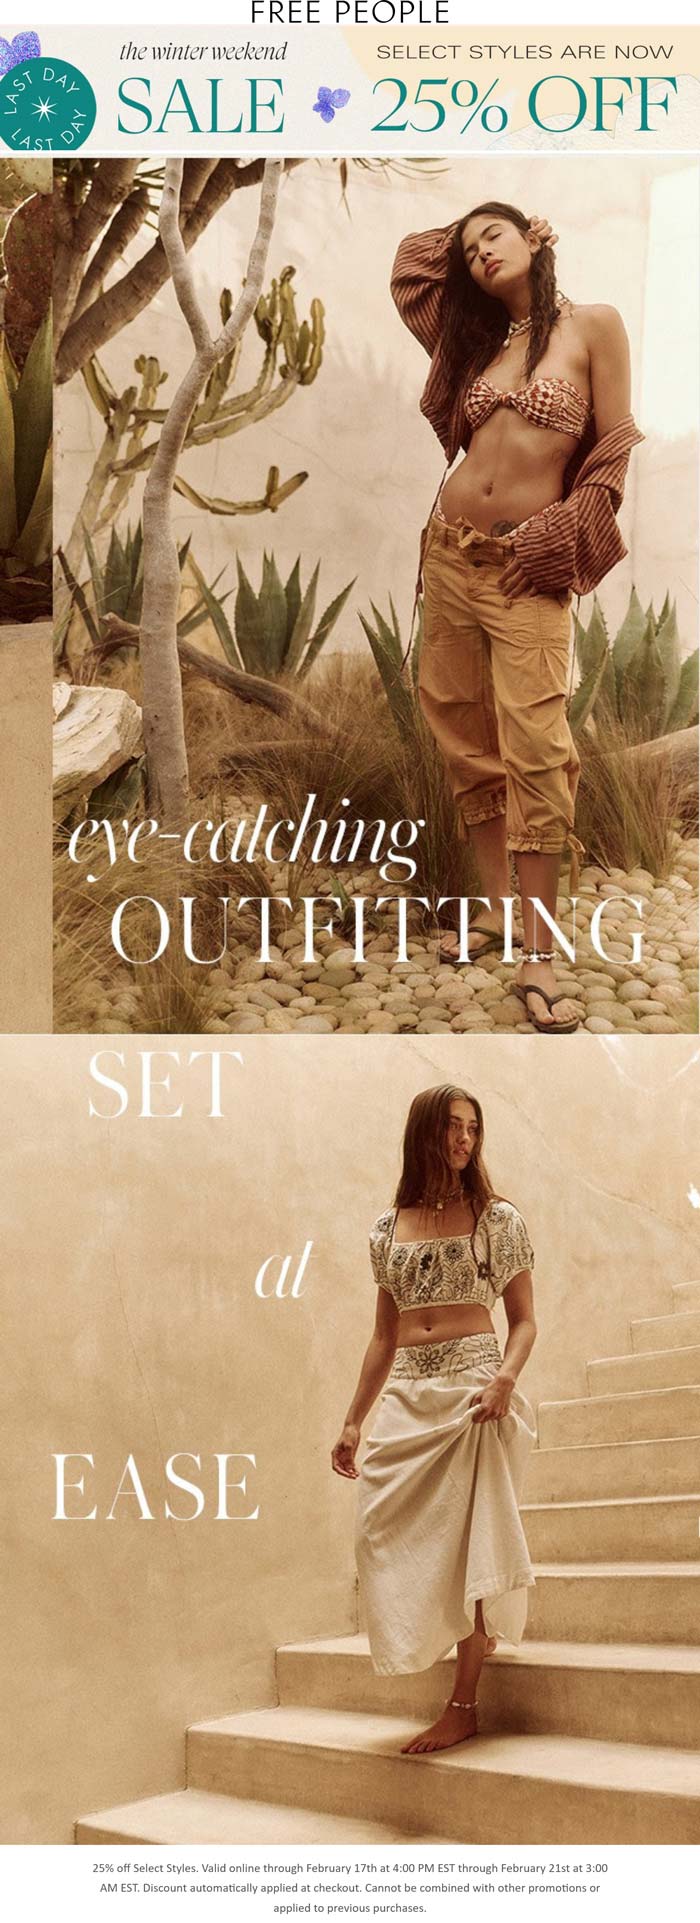 Free People stores Coupon  25% off today at Free People #freepeople 